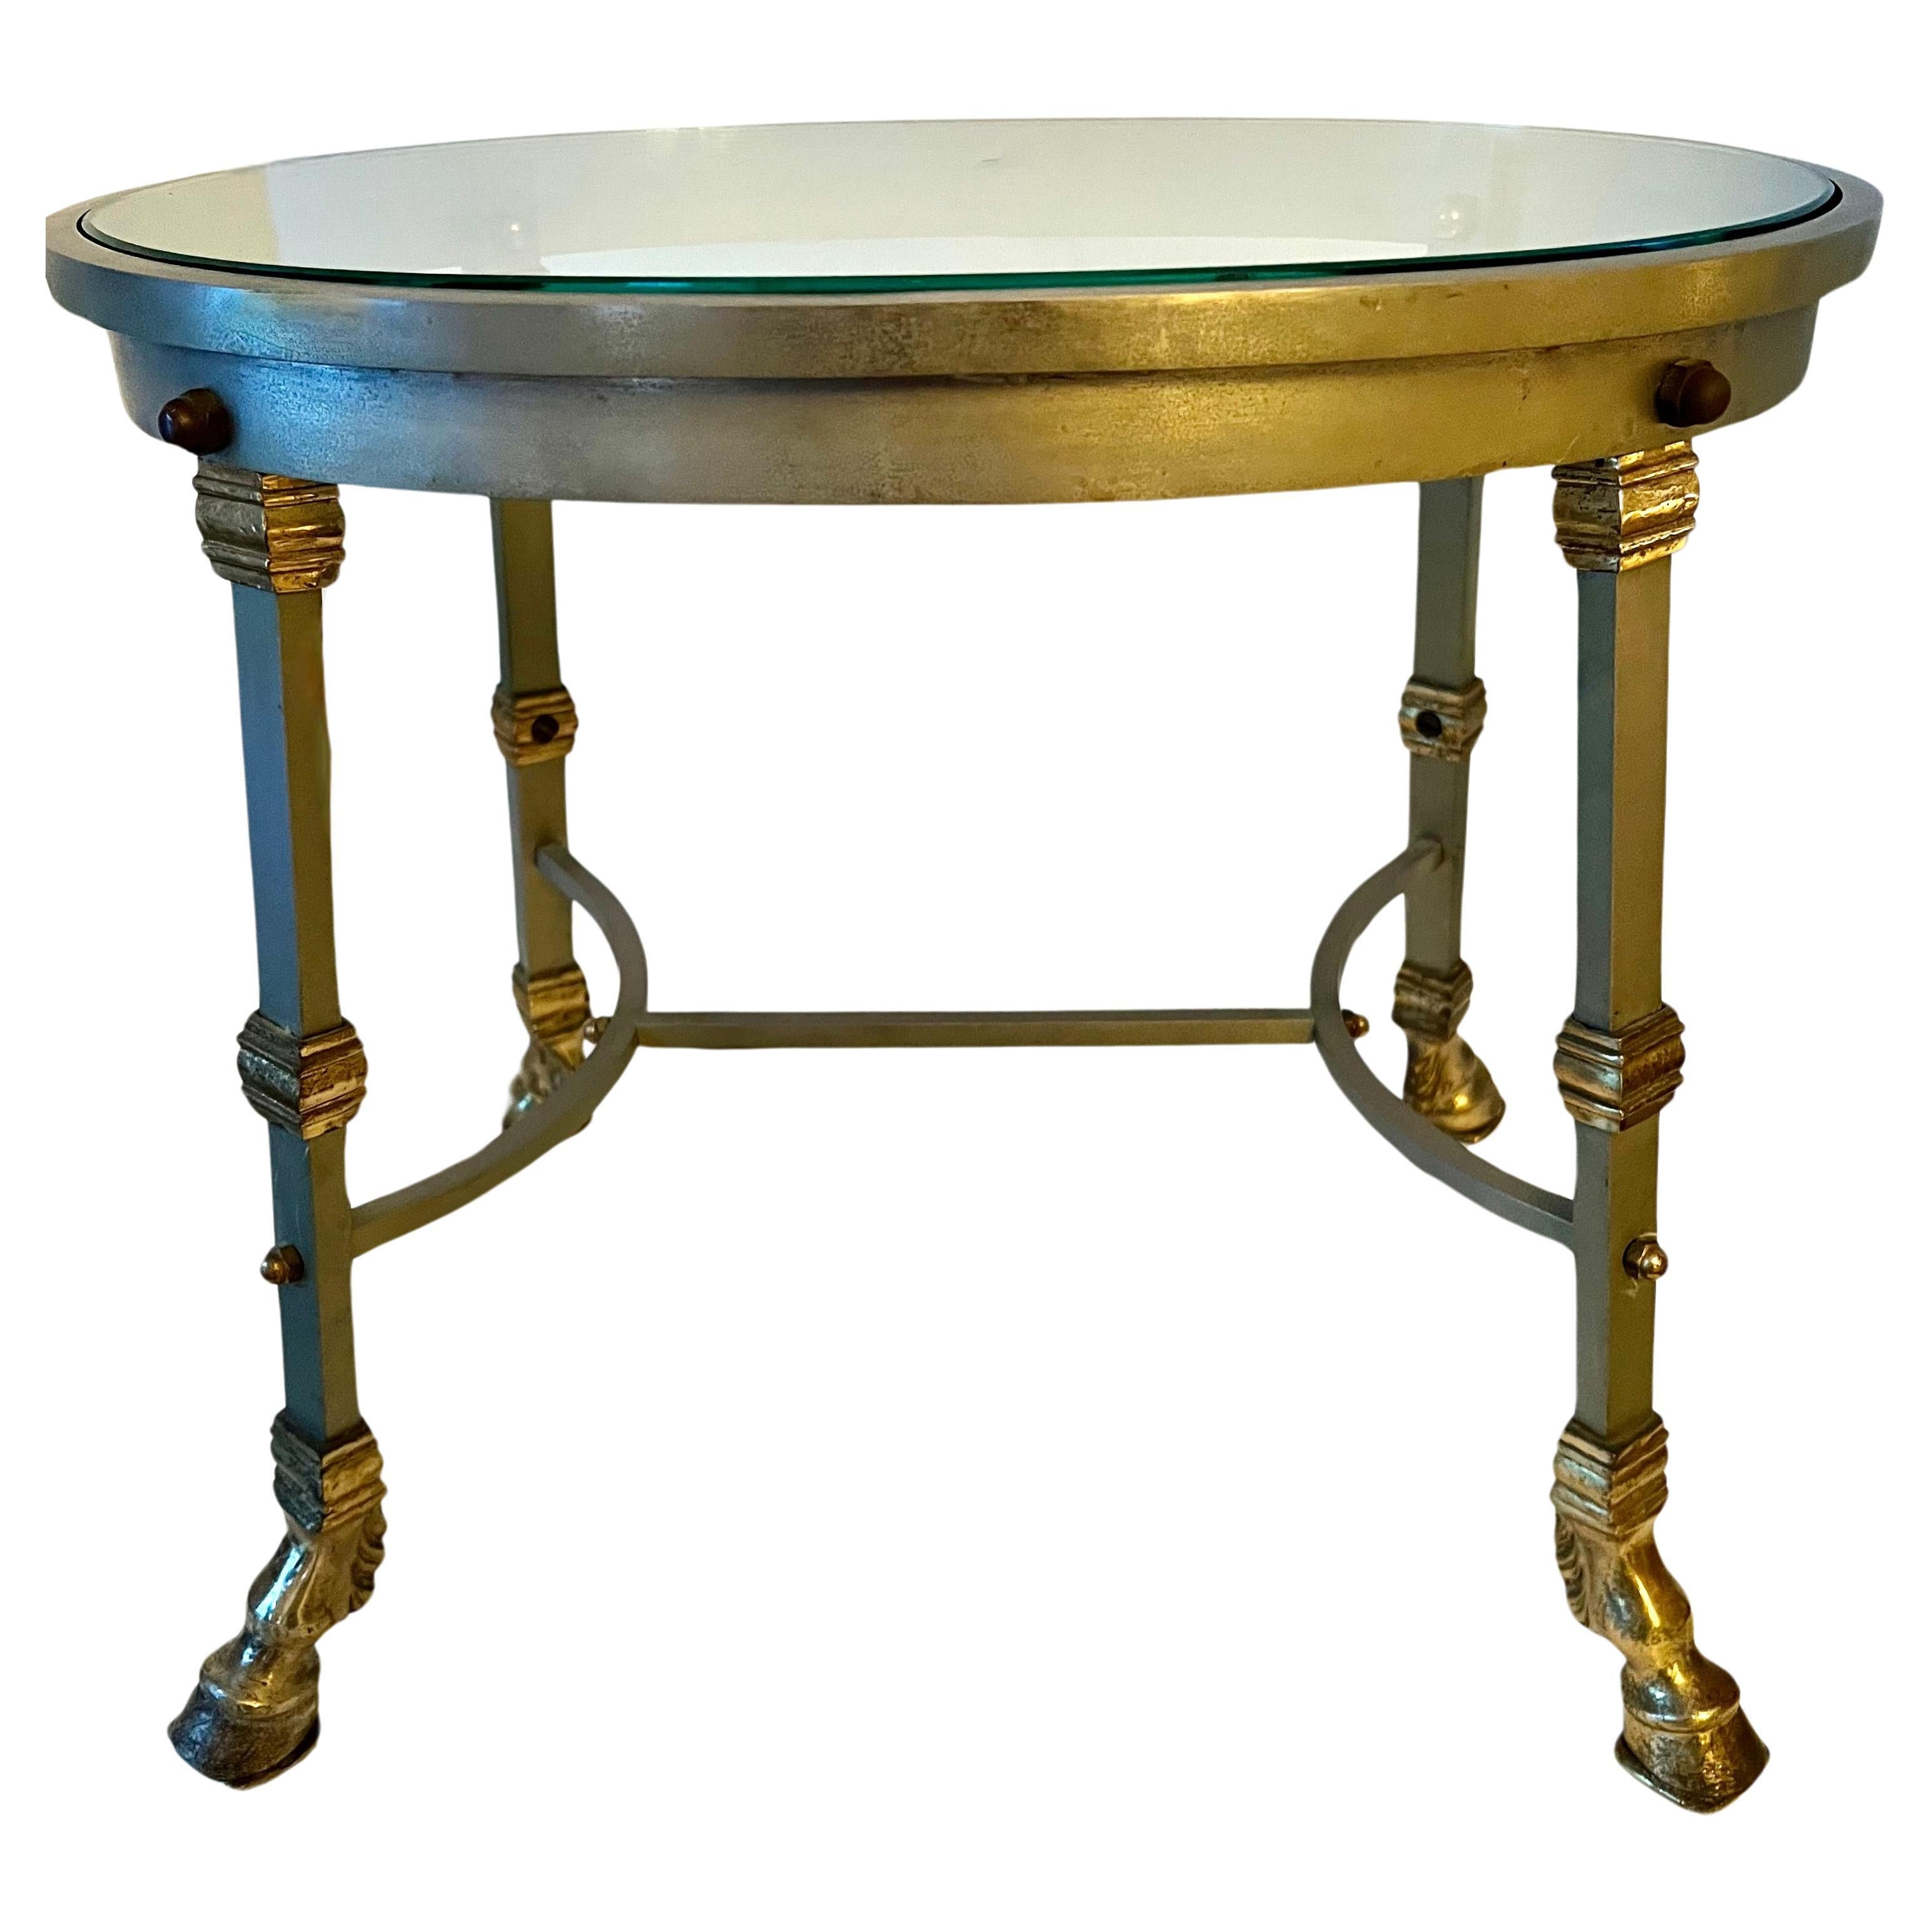 French Glass Top Maison Jansen Steel and Brass Side Table with Bronze Hoof Feet